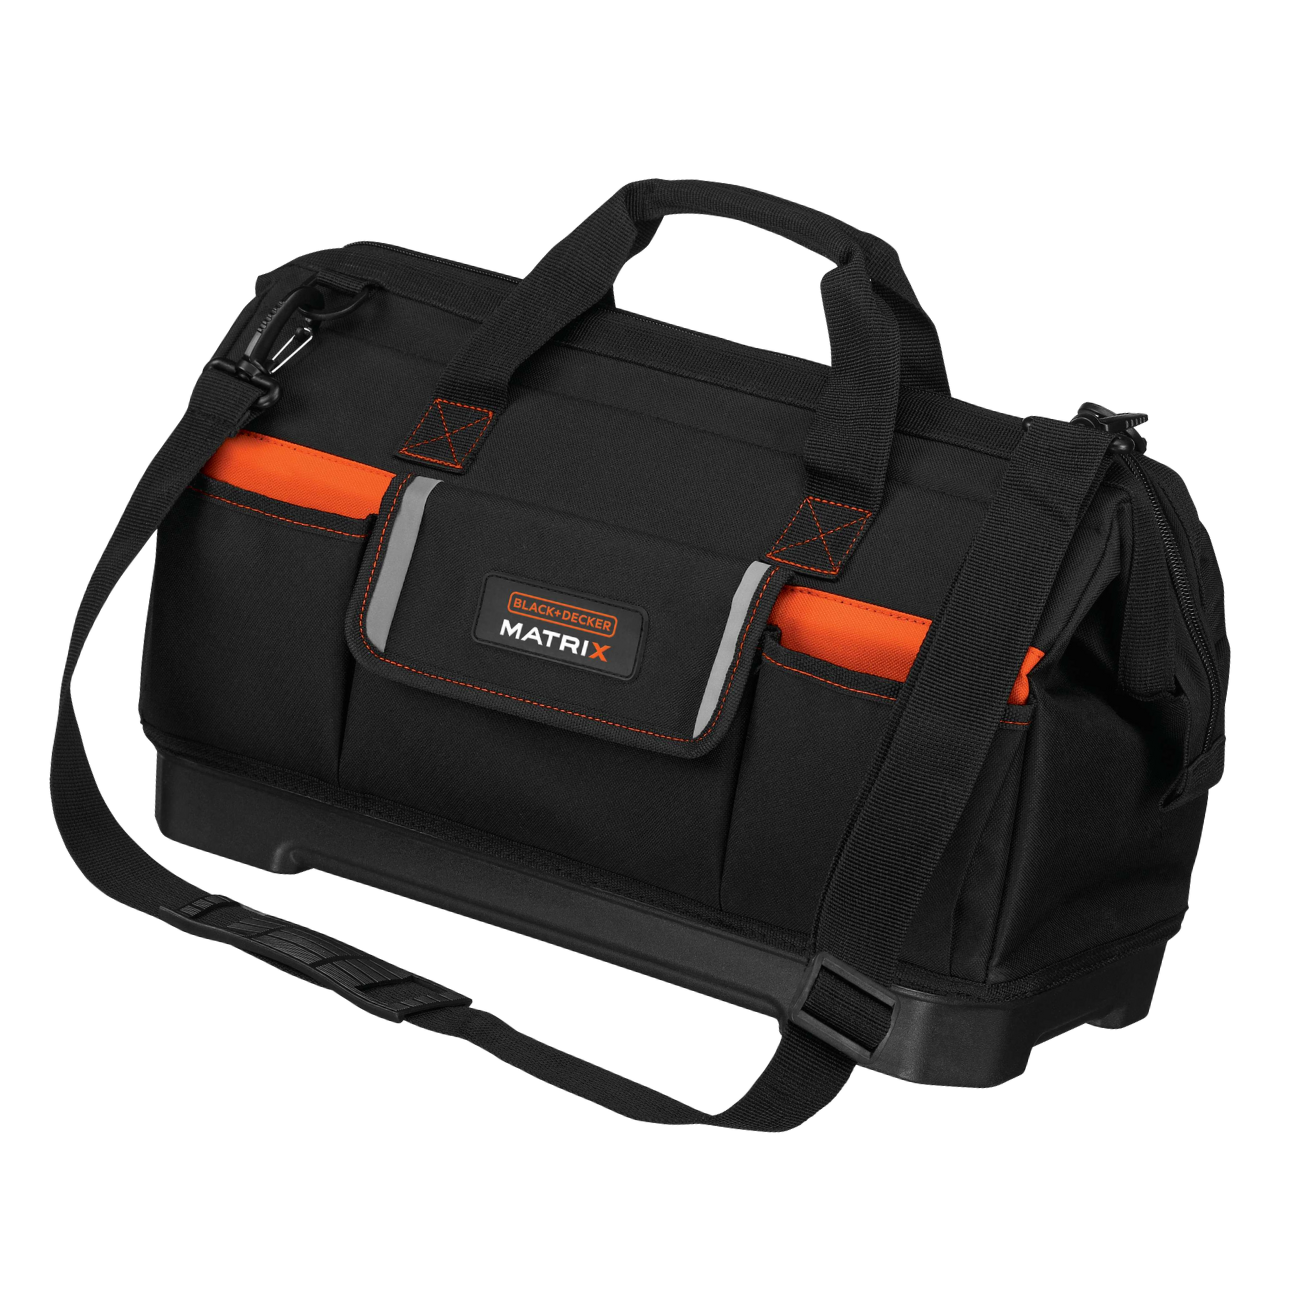 Black and Decker tool bag/shoulder bag/ipad bag/tote/case in great  condition